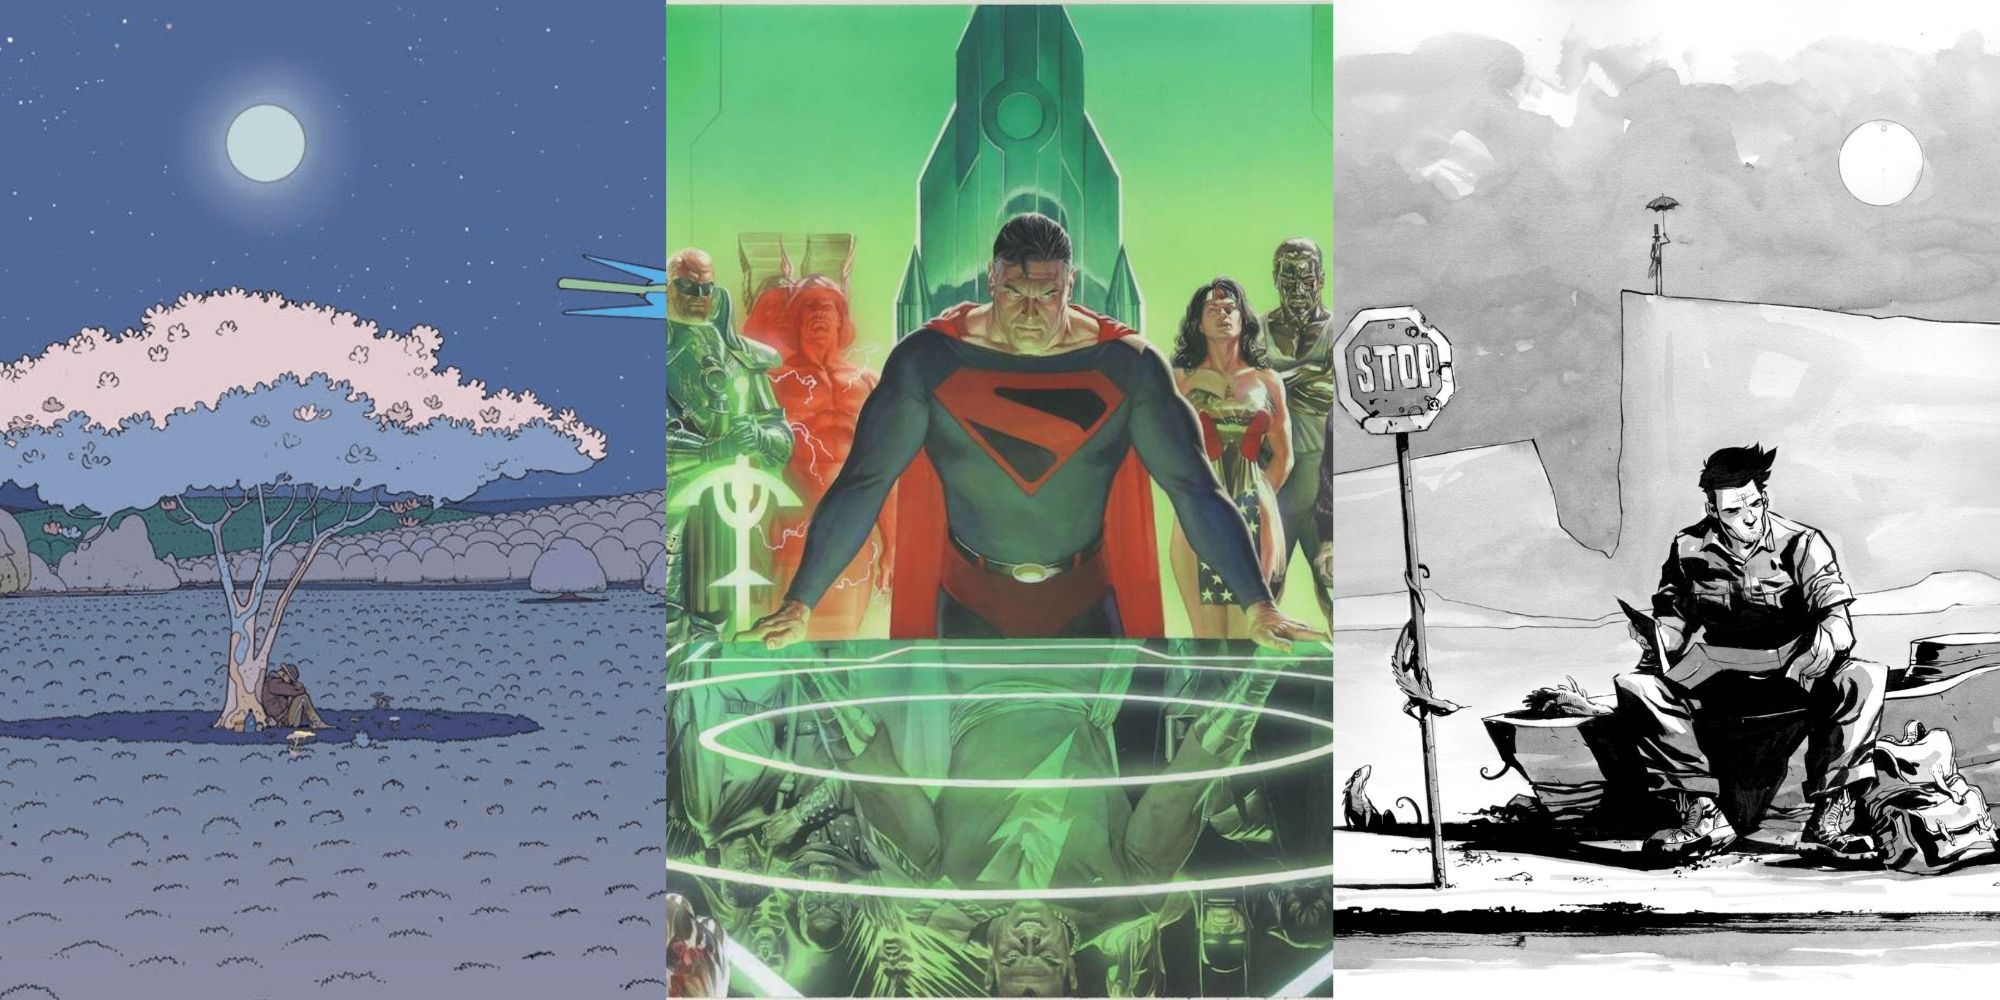 Superman looms over the table while other characters sit out in nature